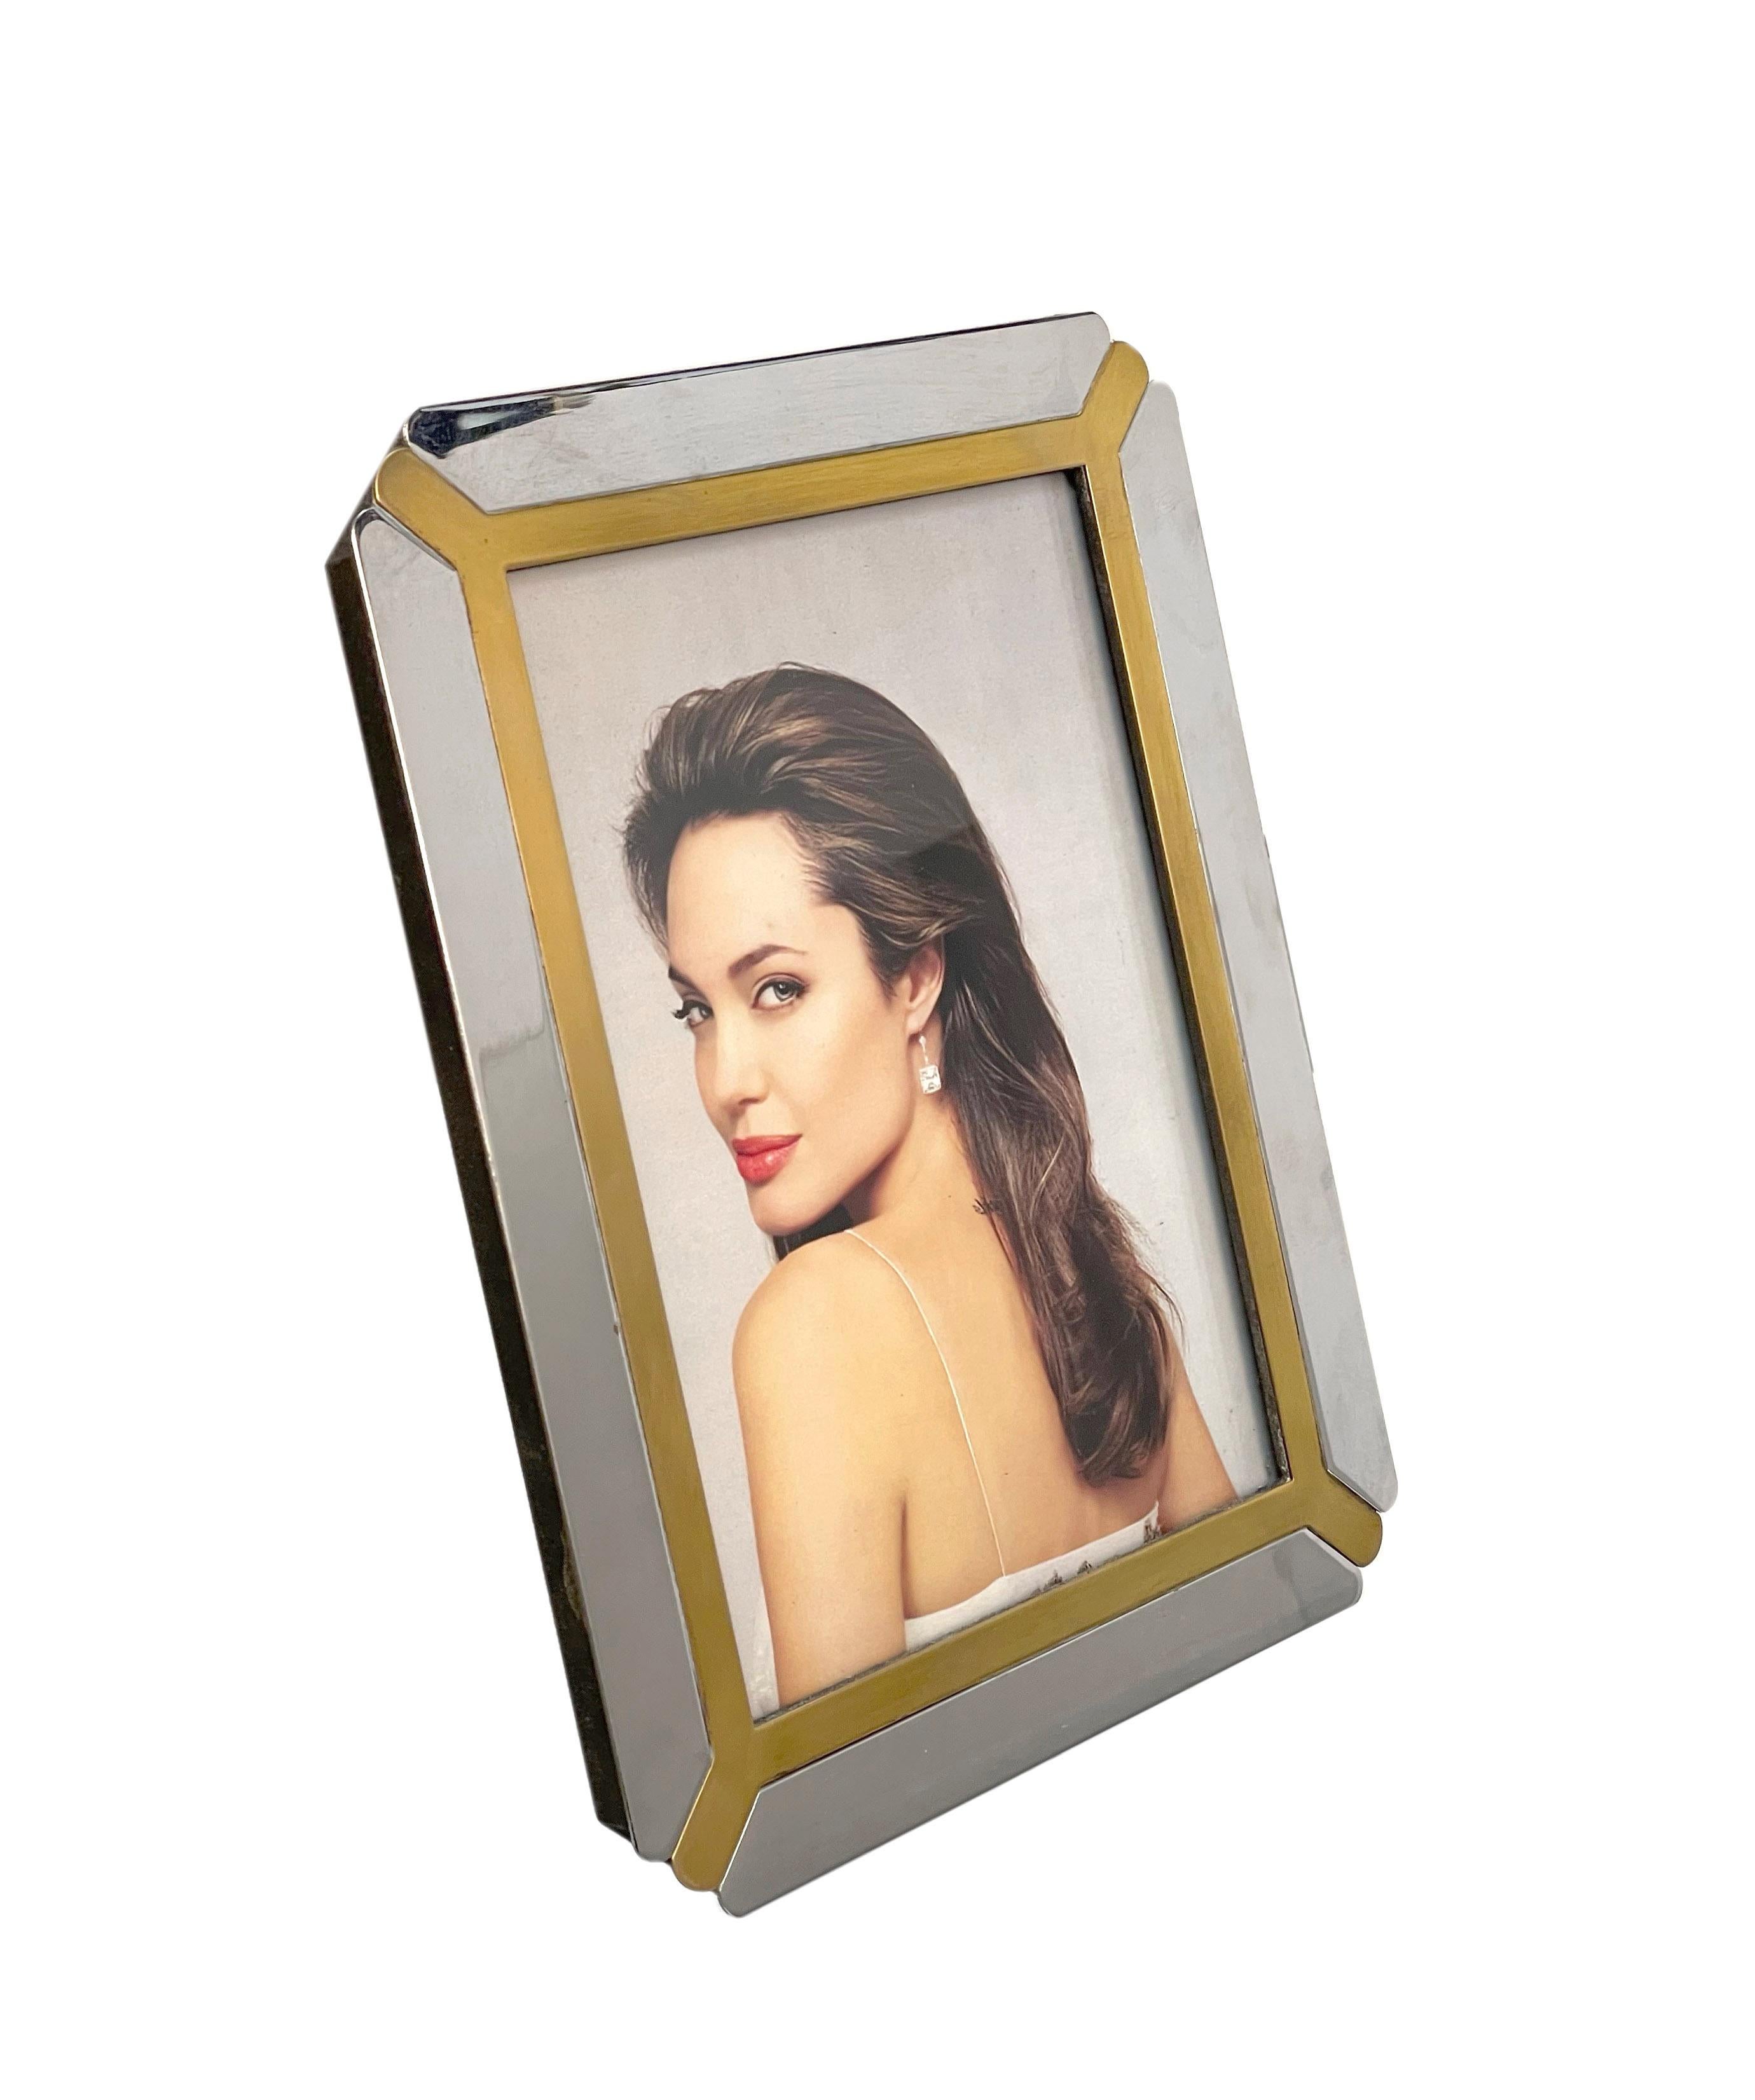 Amazing mid-century brass and chrome picture frame. This marvellous item was produced in Italy during the 1970s under the strong influence of Romeo Rega..

 The inspiration to the design of this Italian master it is visible through the combination